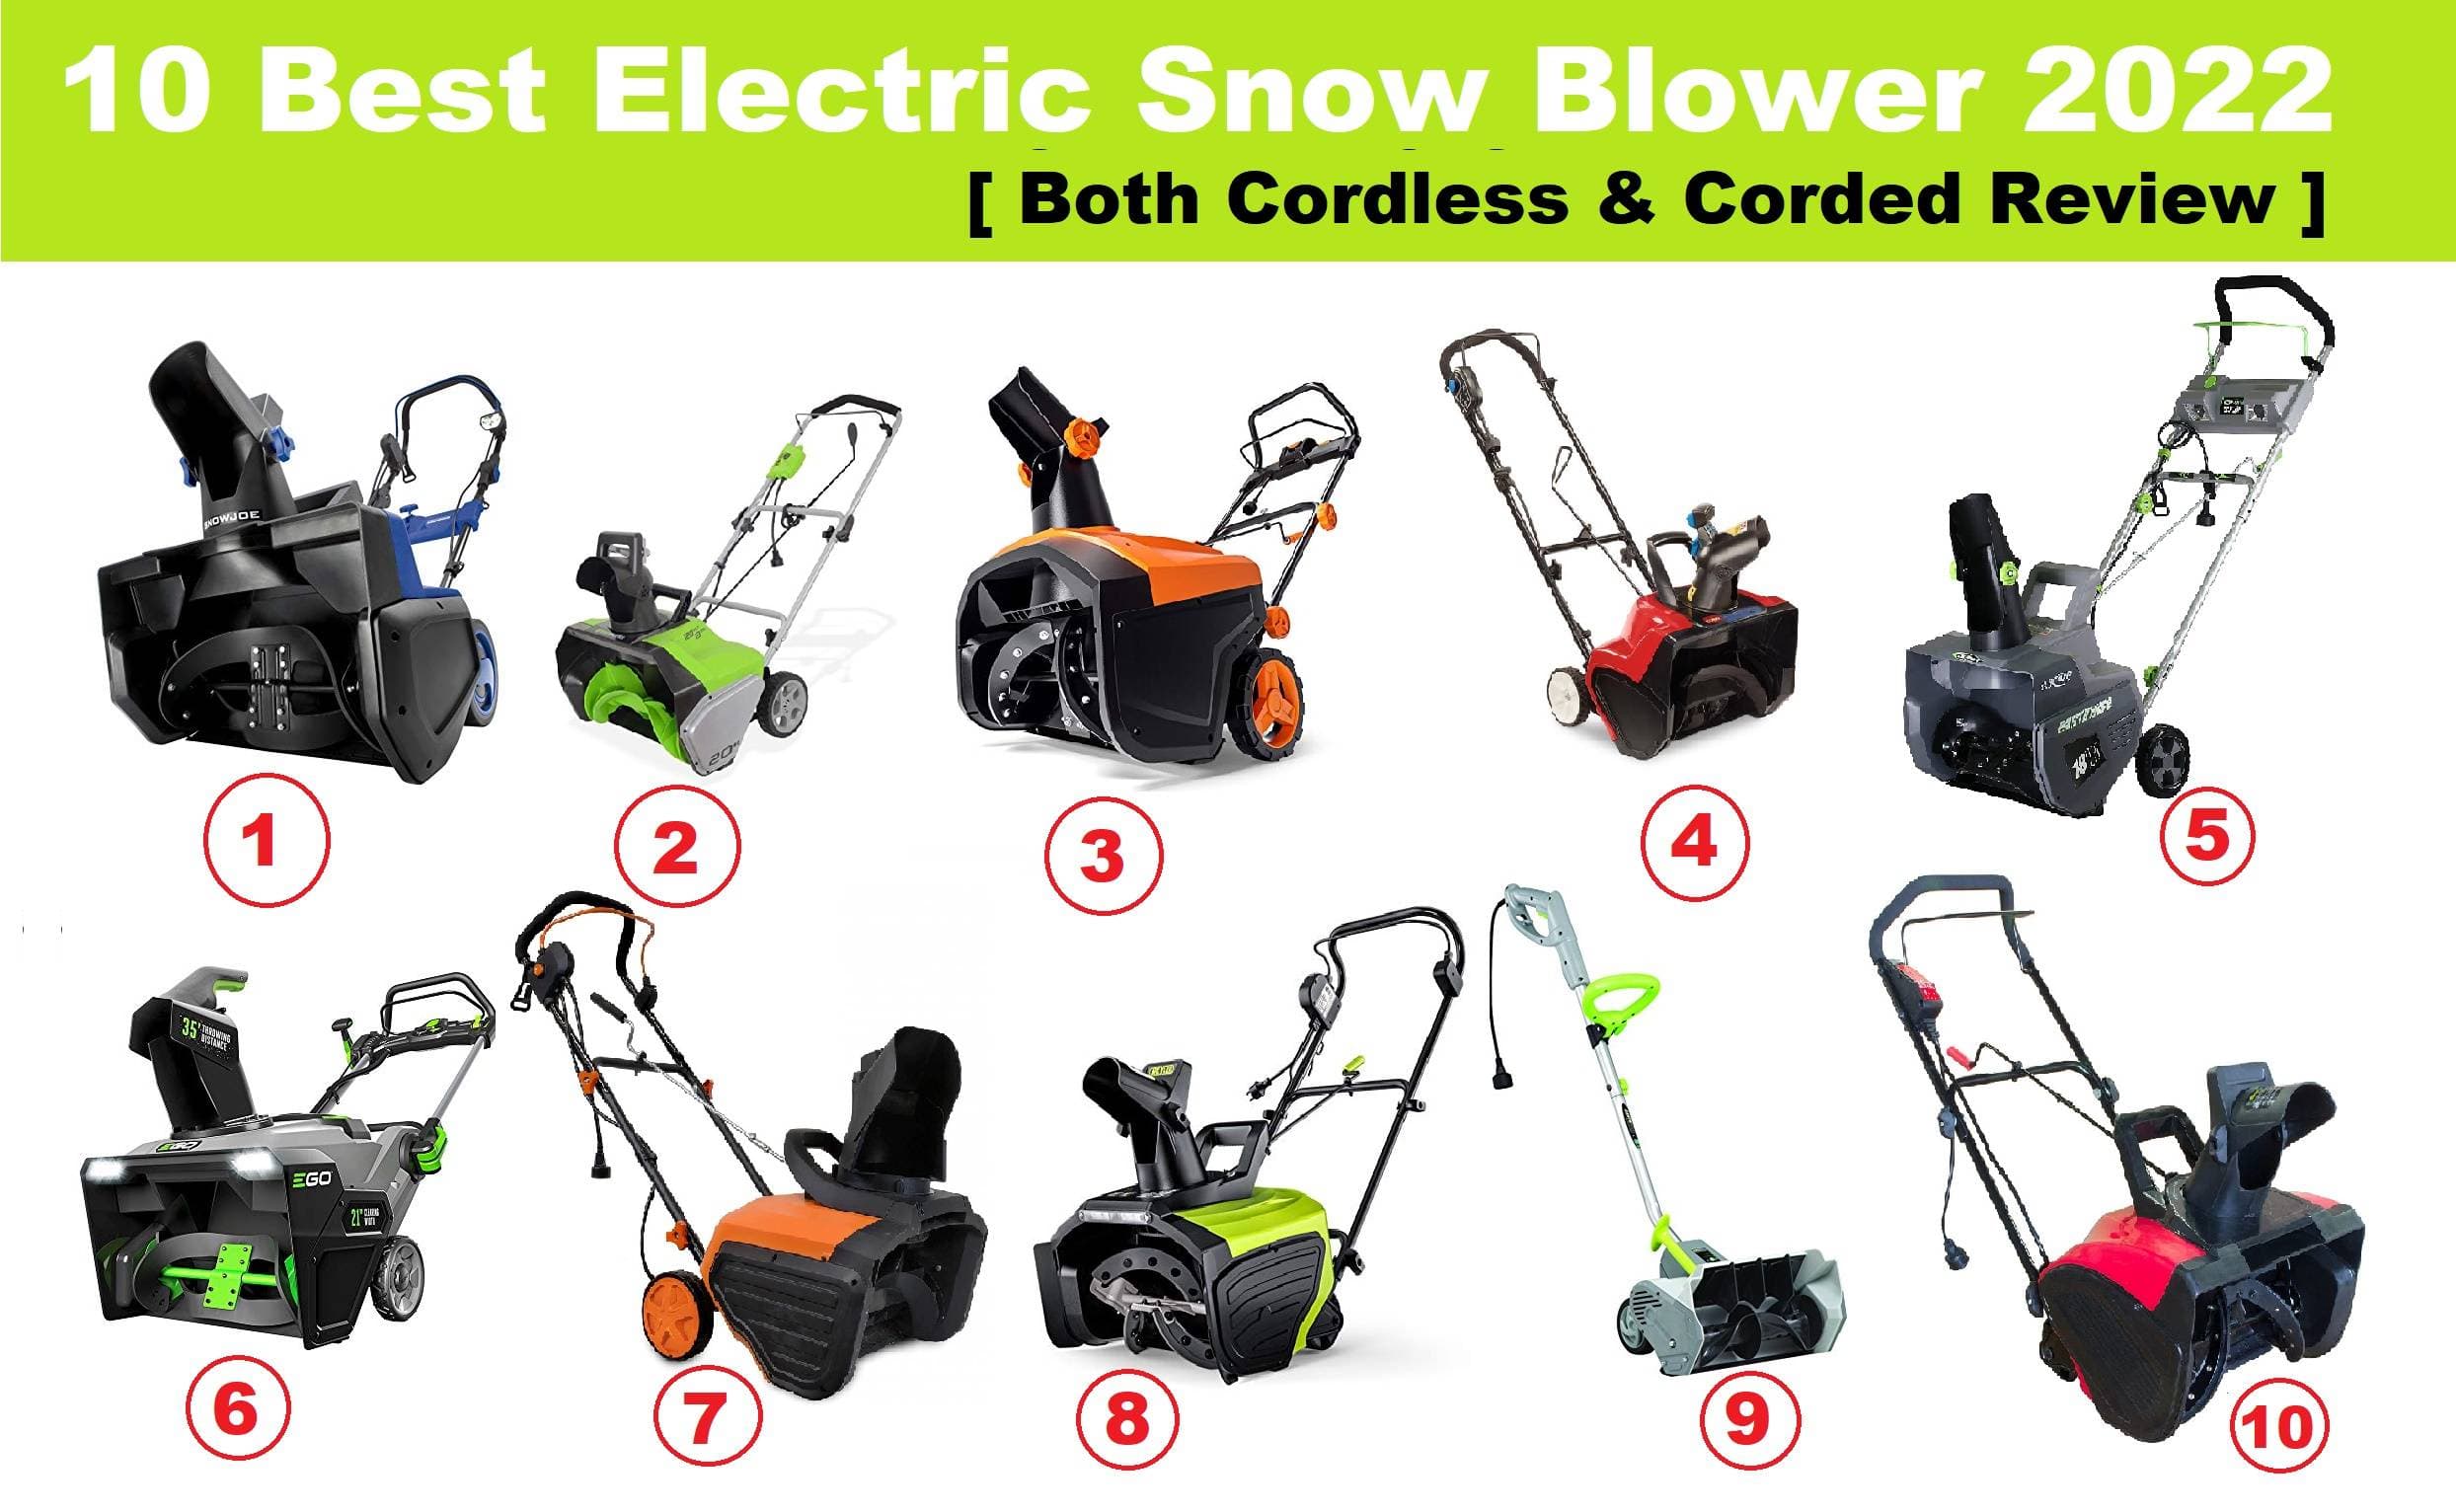 10 Best Electric Snow Blower 2022 Cordless & Corded Reviewed Compared